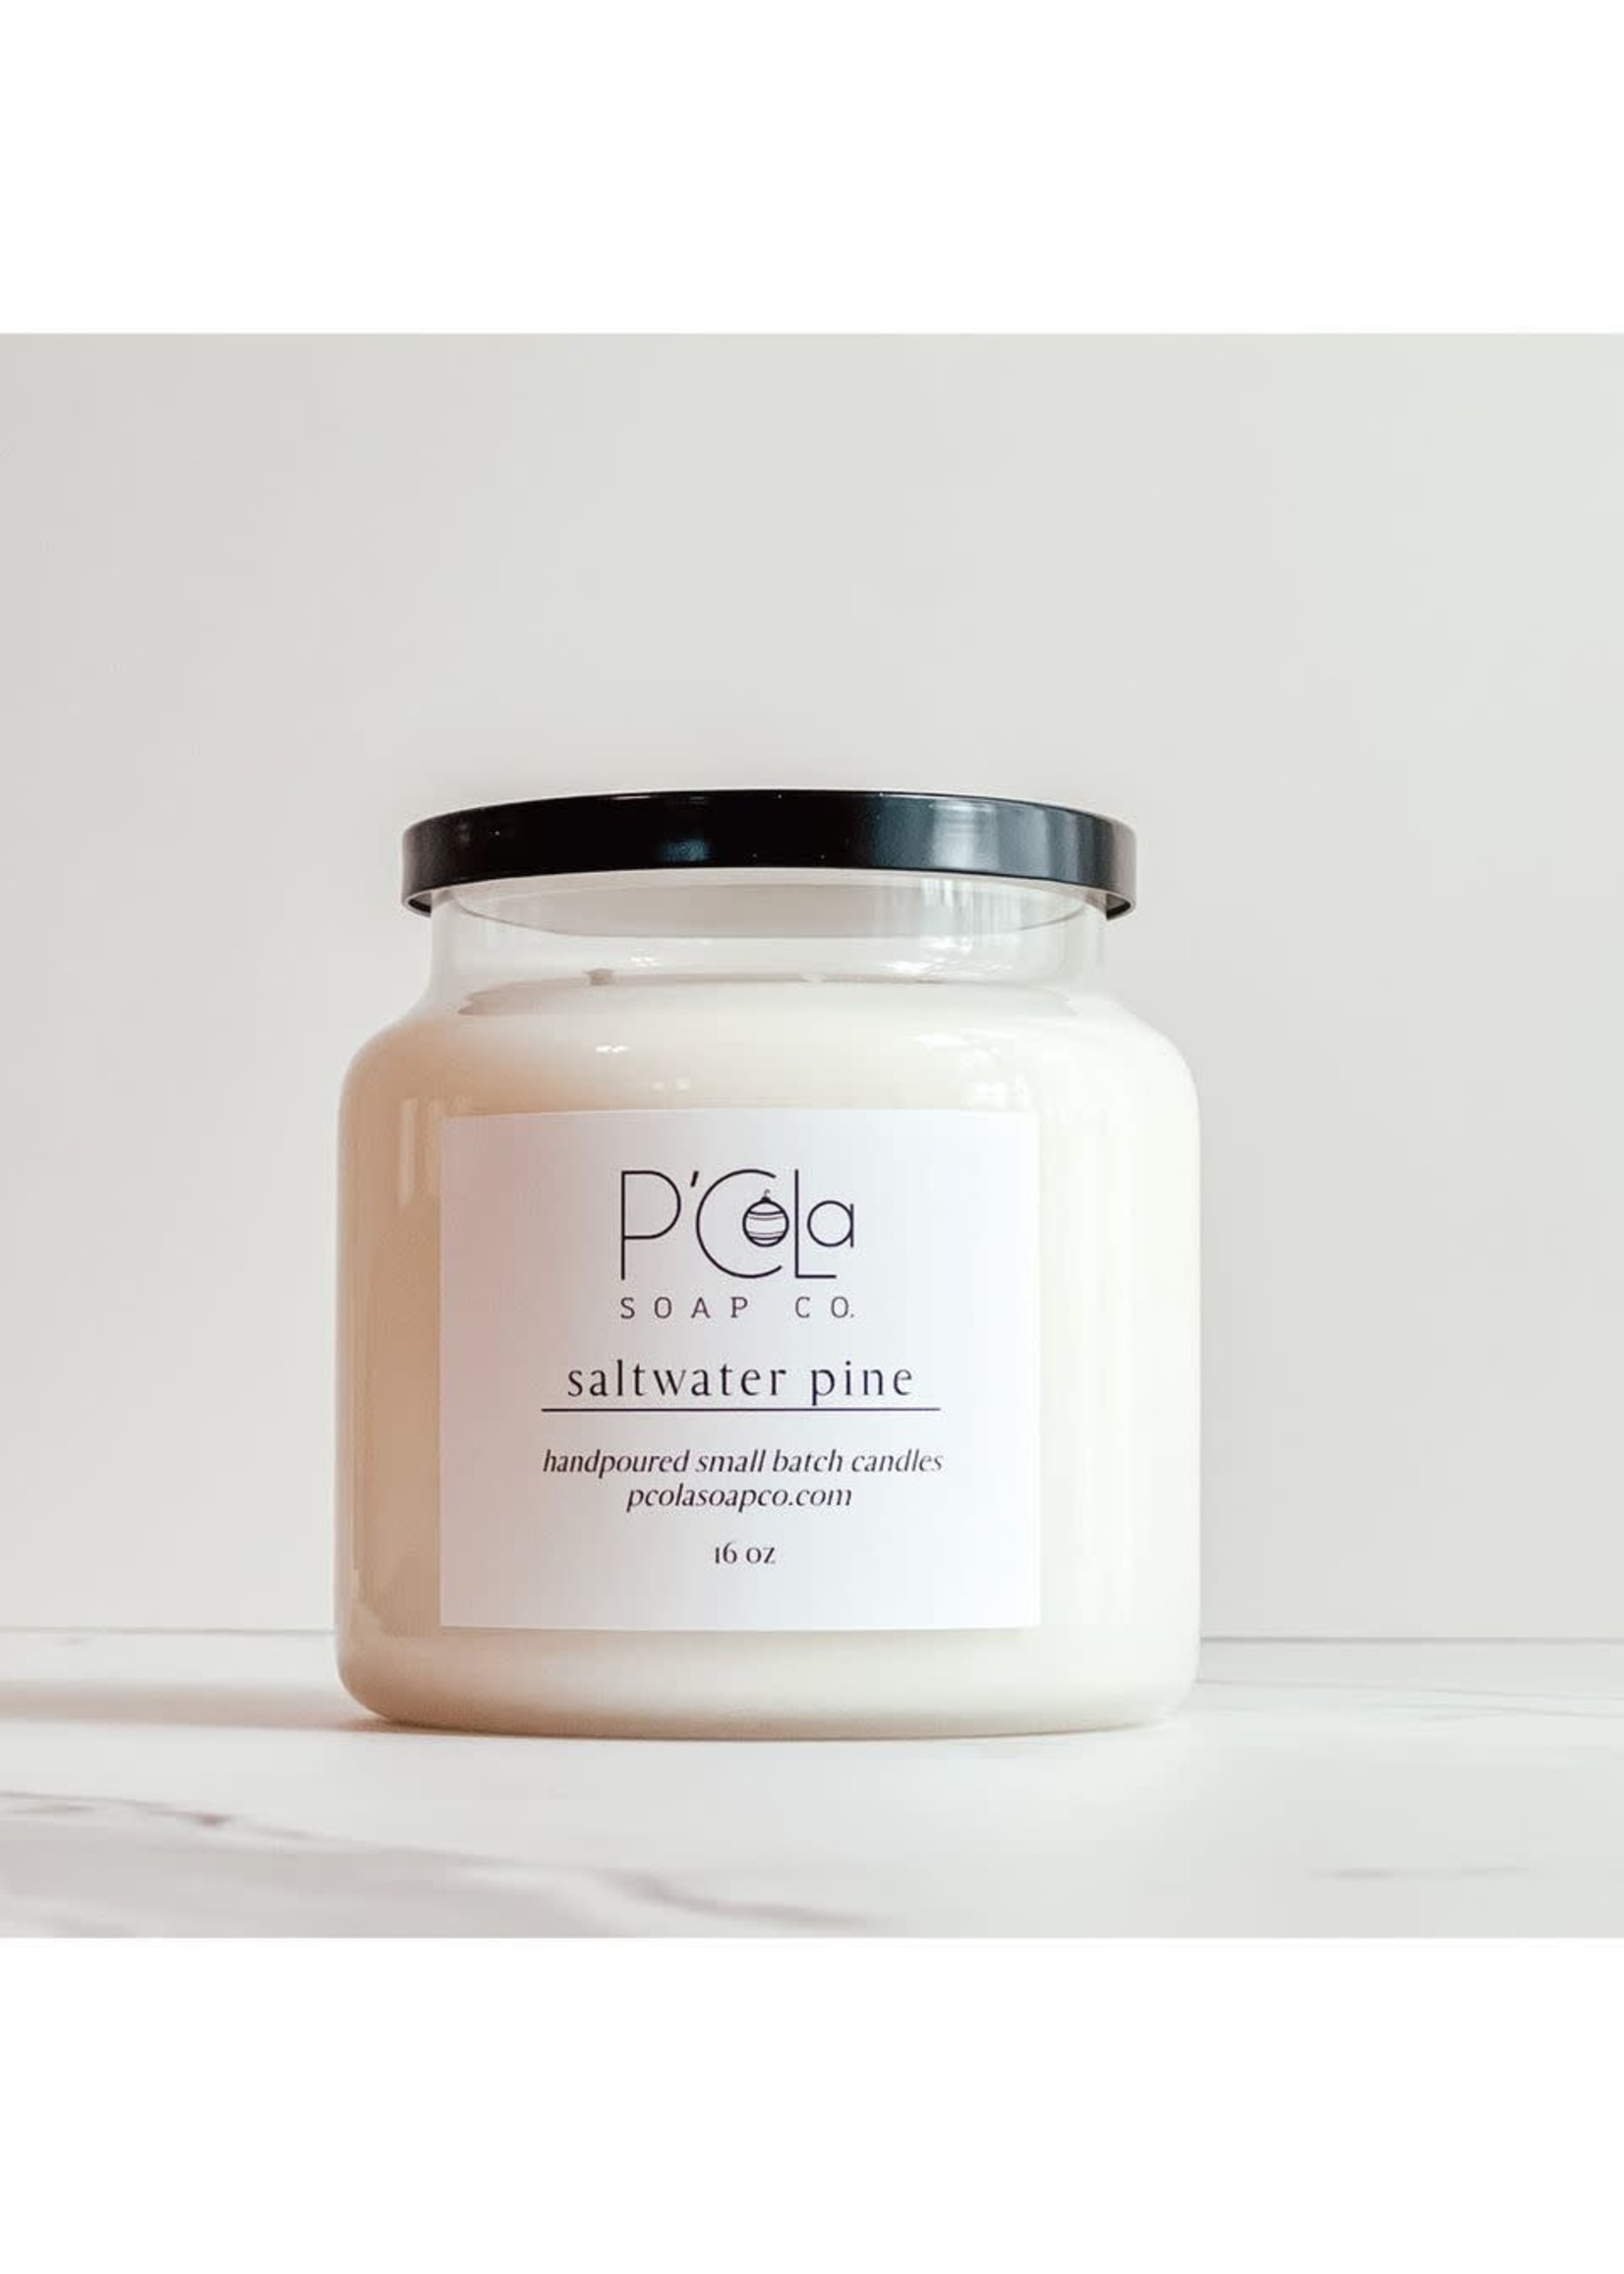 P'Cola Soap Co. Saltwater Pine Candle